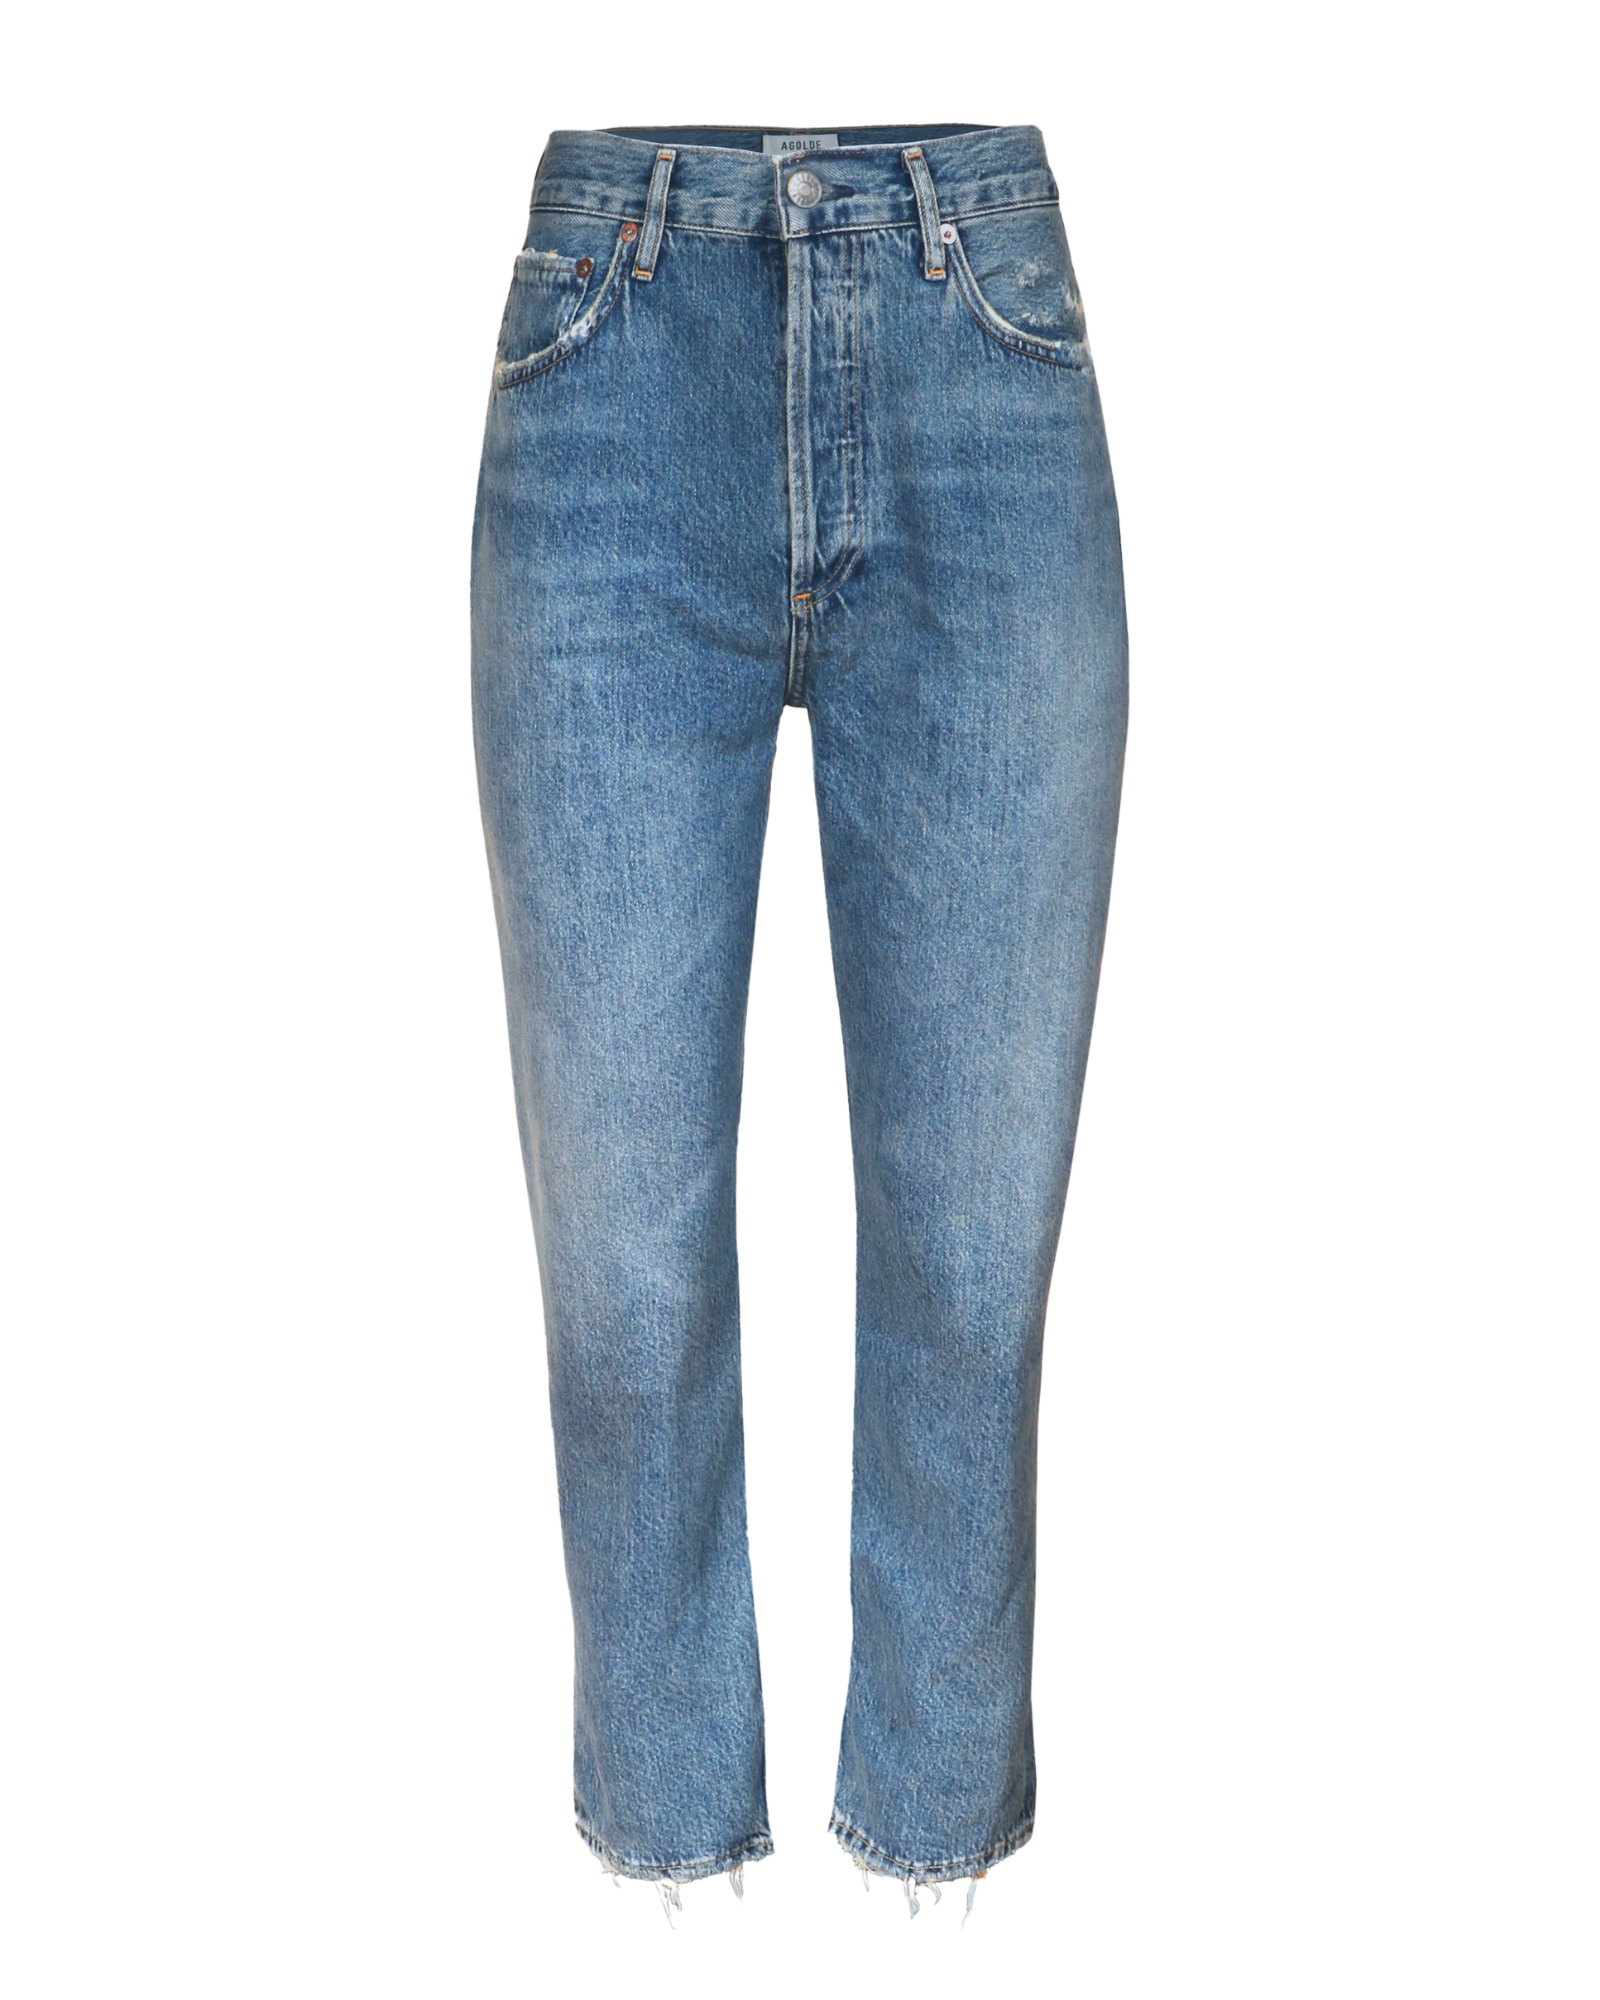 Agolde Riley Crop Jean in Frequency